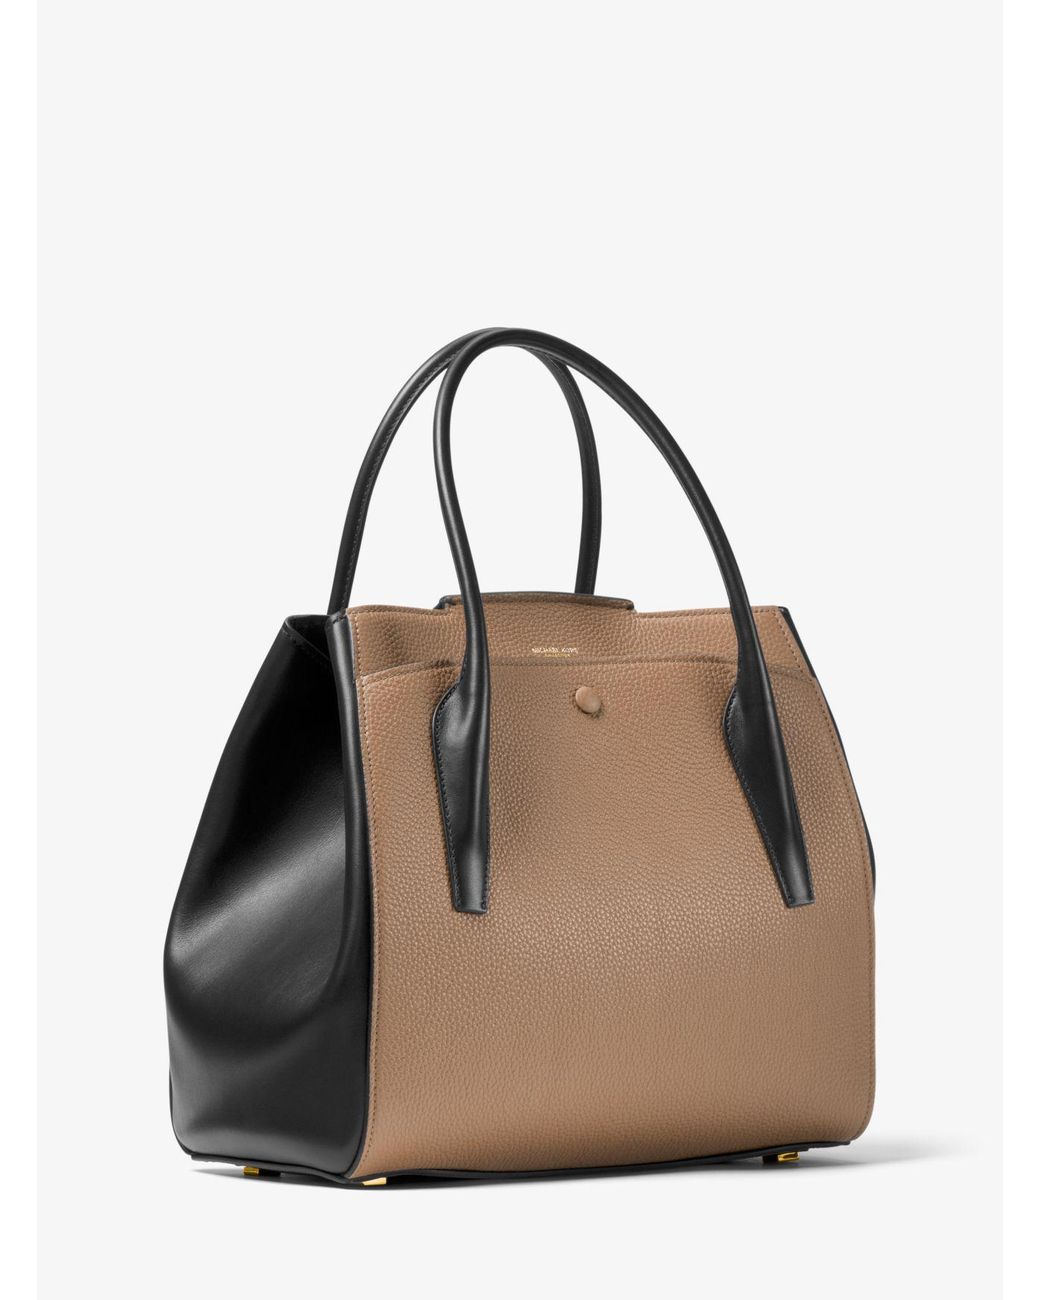 Michael Kors Bancroft Large Leather Tote in Black | Lyst